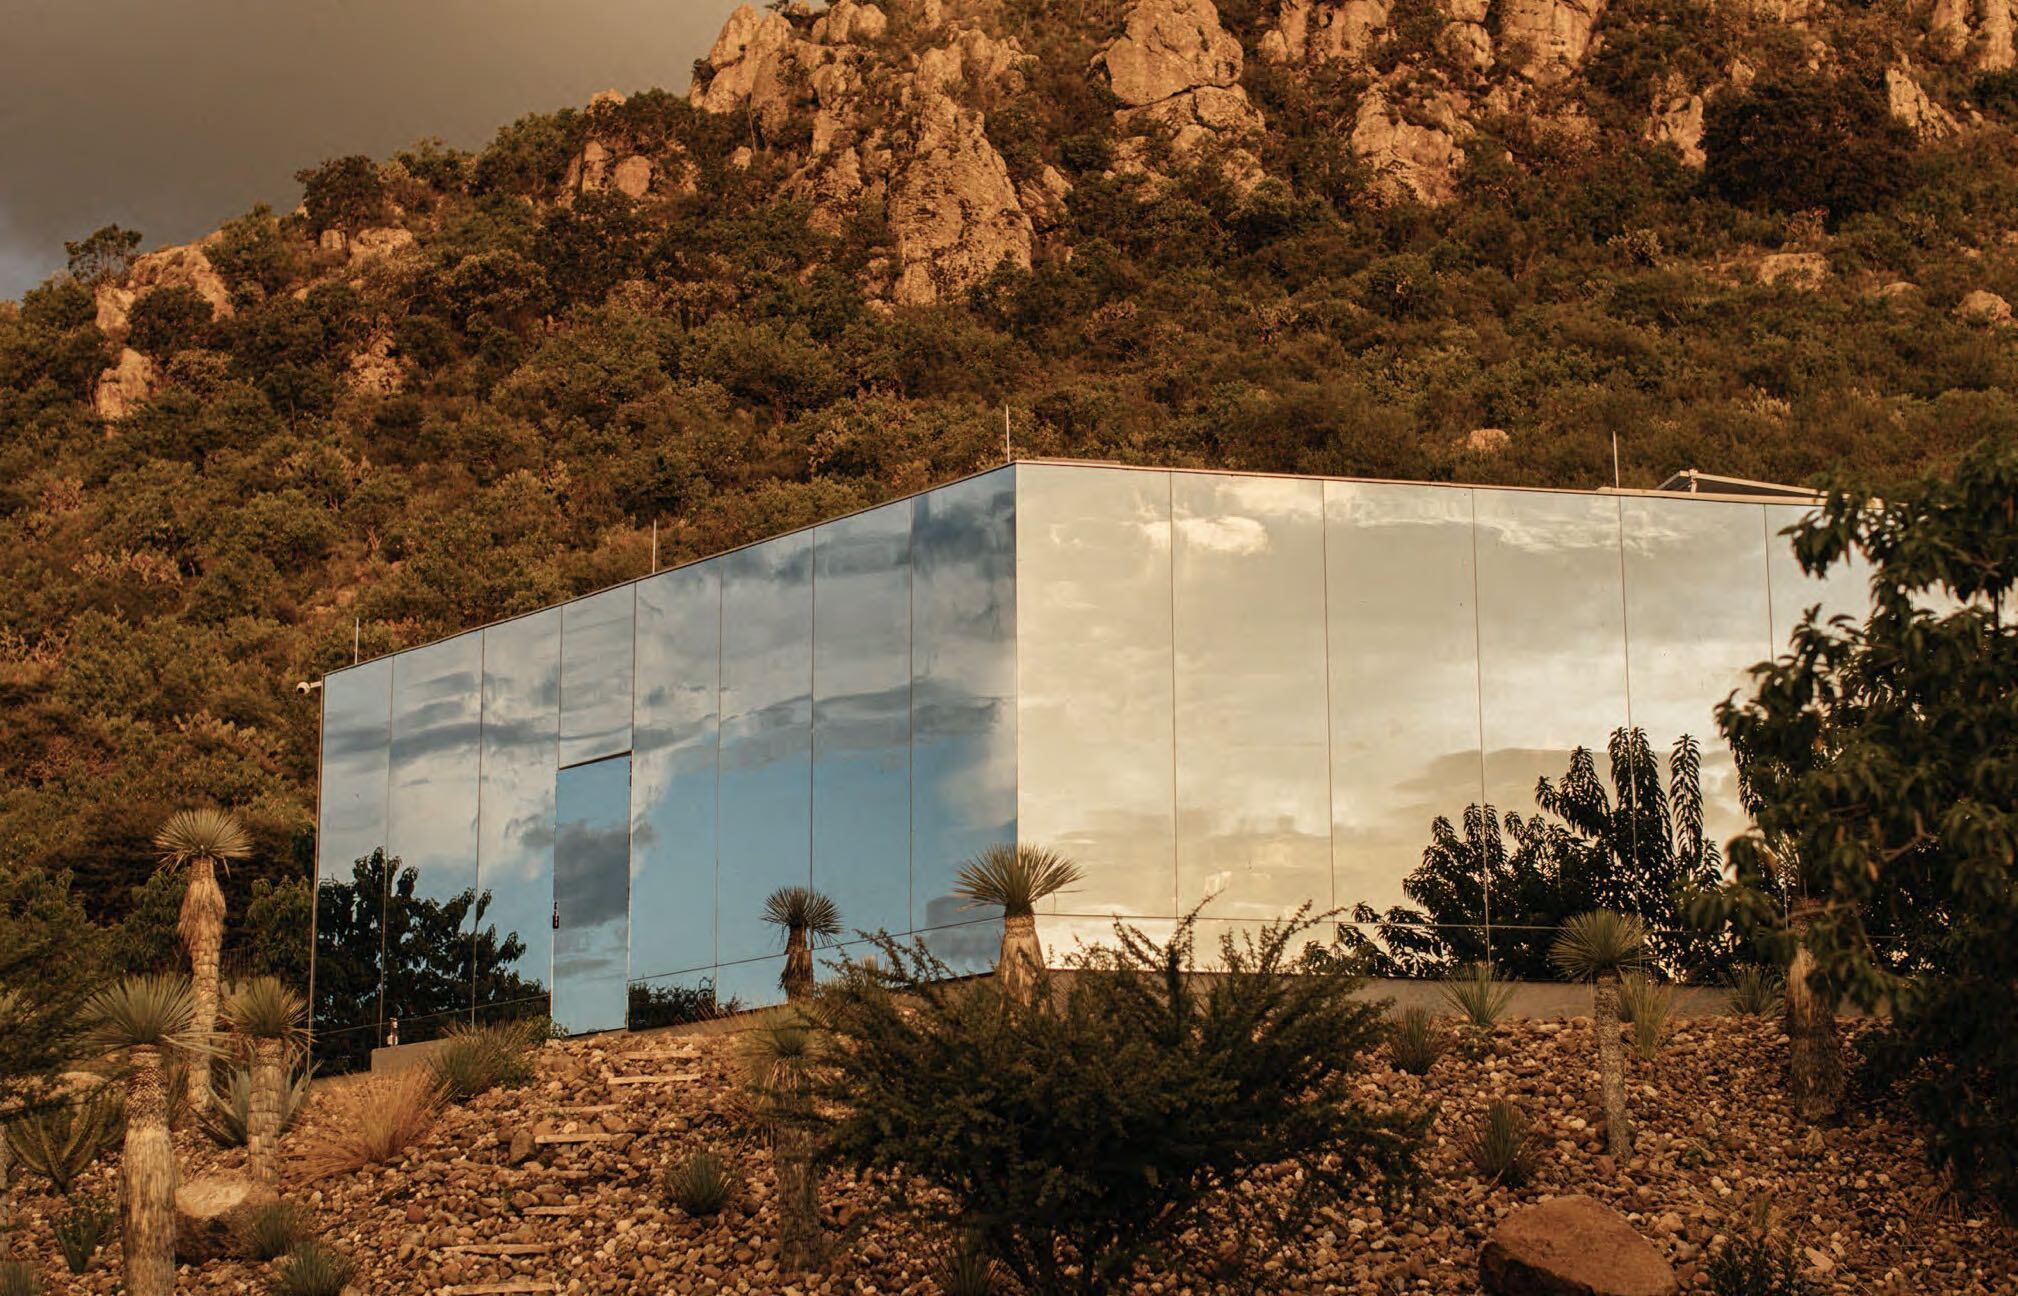 Casa Etérea in San Miguel de Allende, Mexico, runs on solar energy, collects rainwater, and uses a patterned ultraviolet coating on the mirror making it visible to birds while remaining reflective to the human eye